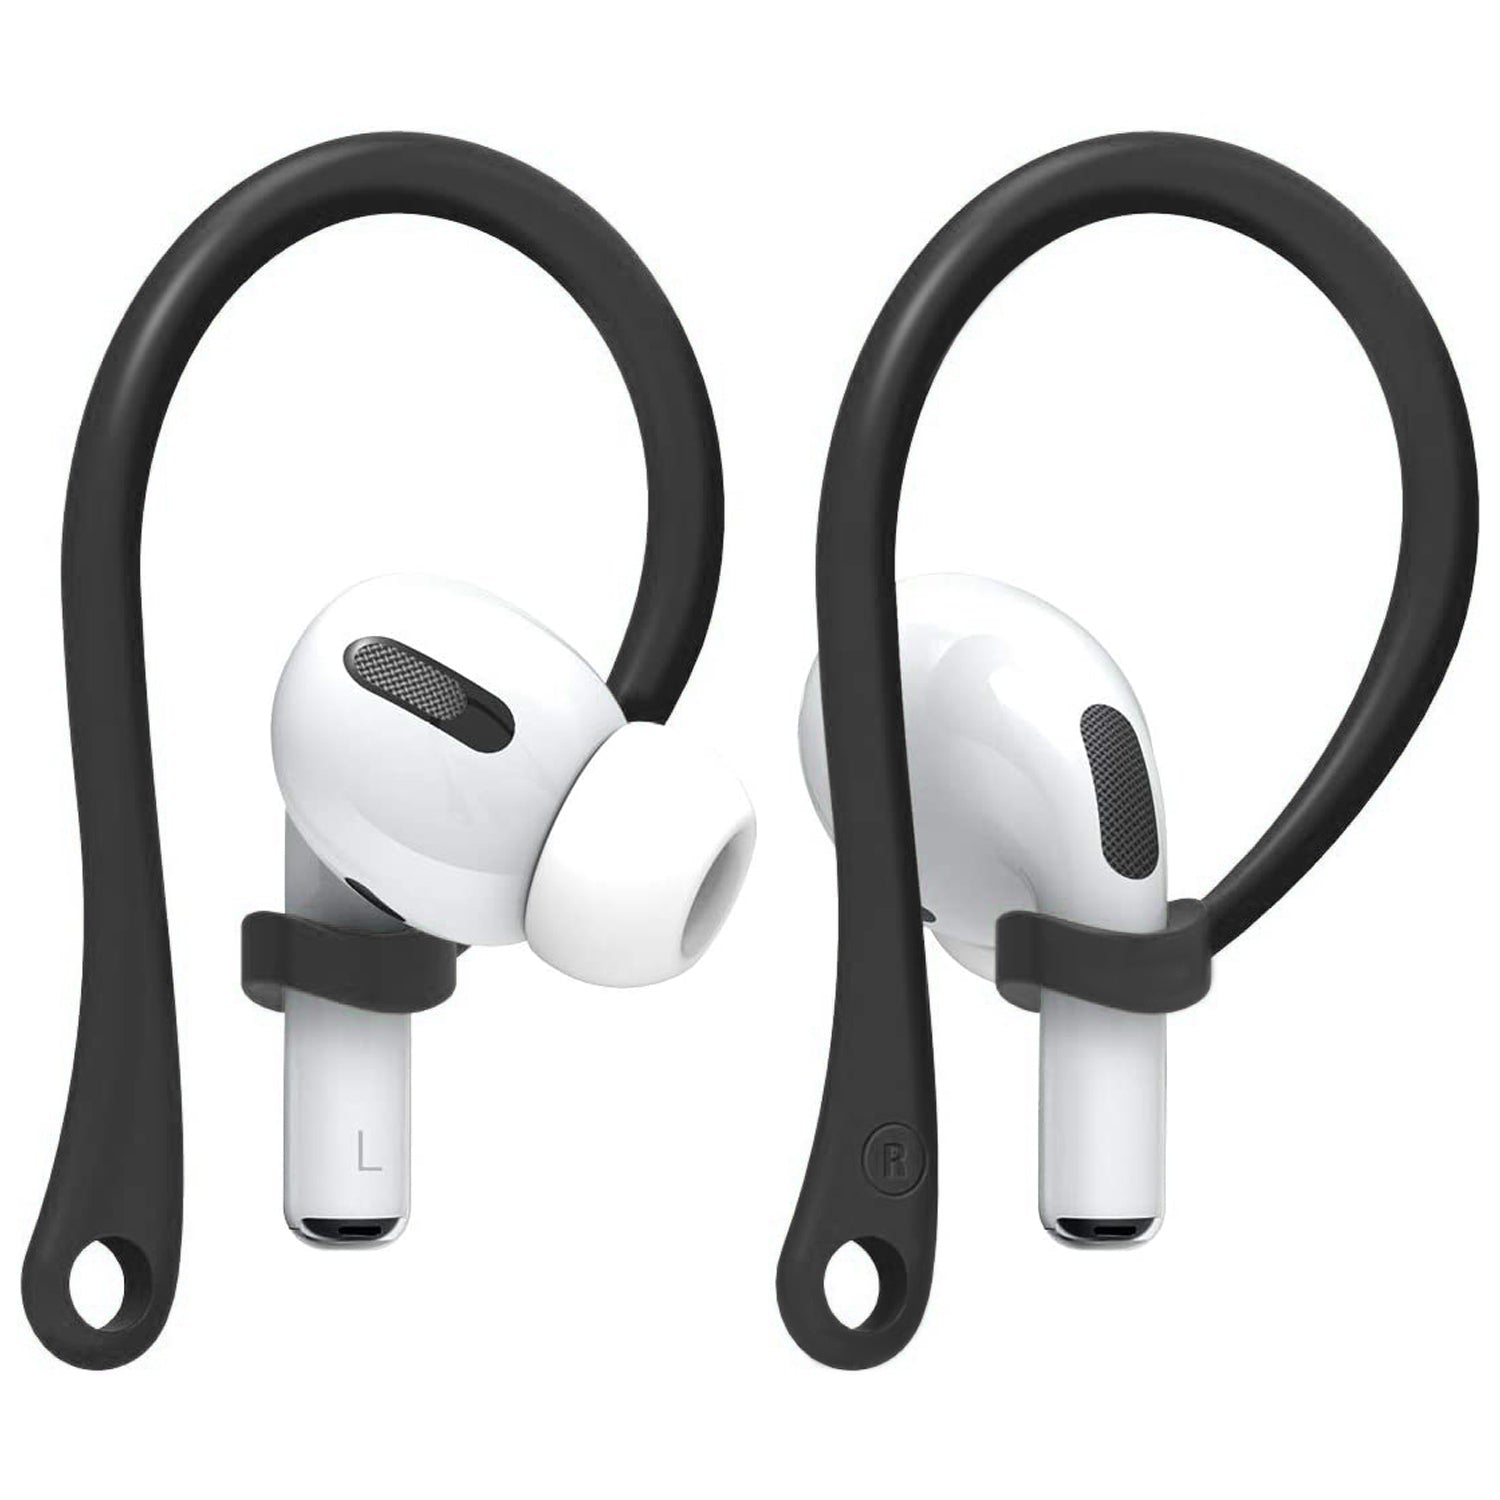 Earbuds  Anti-lost Ear Hook for Apple Air Pods (2PACK)